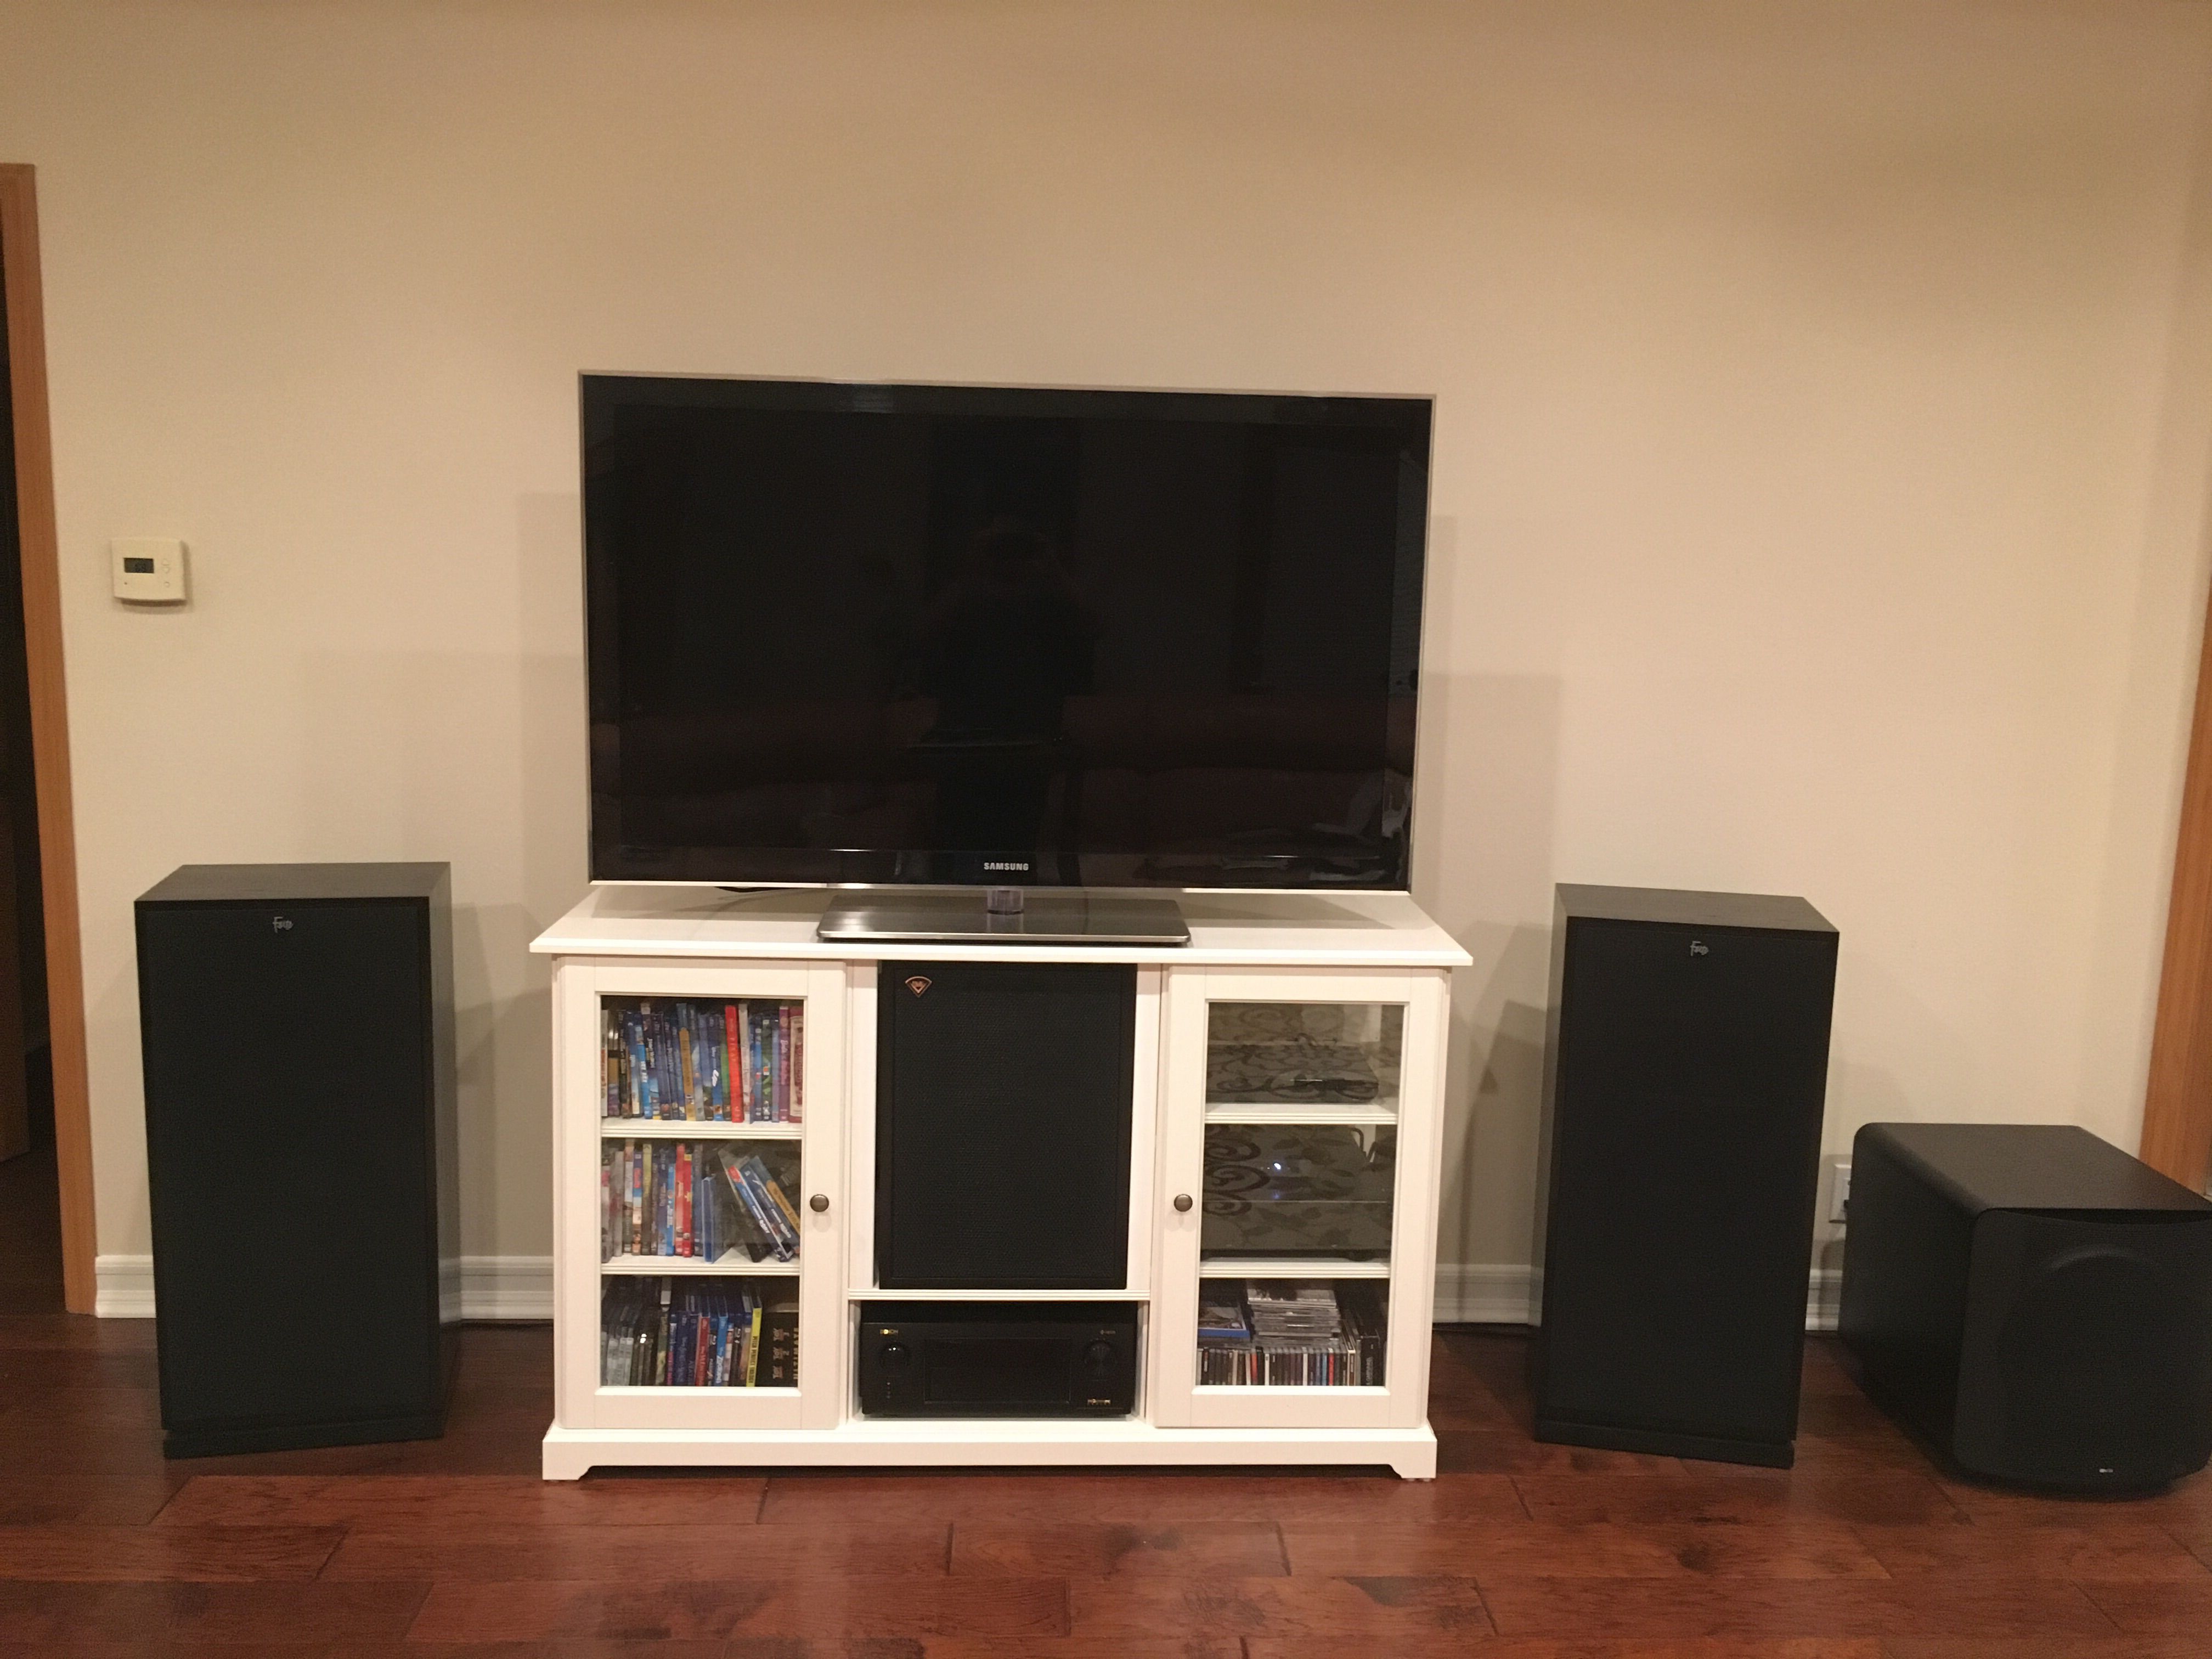 Klipsch Forte IV – Paducah Home Theater